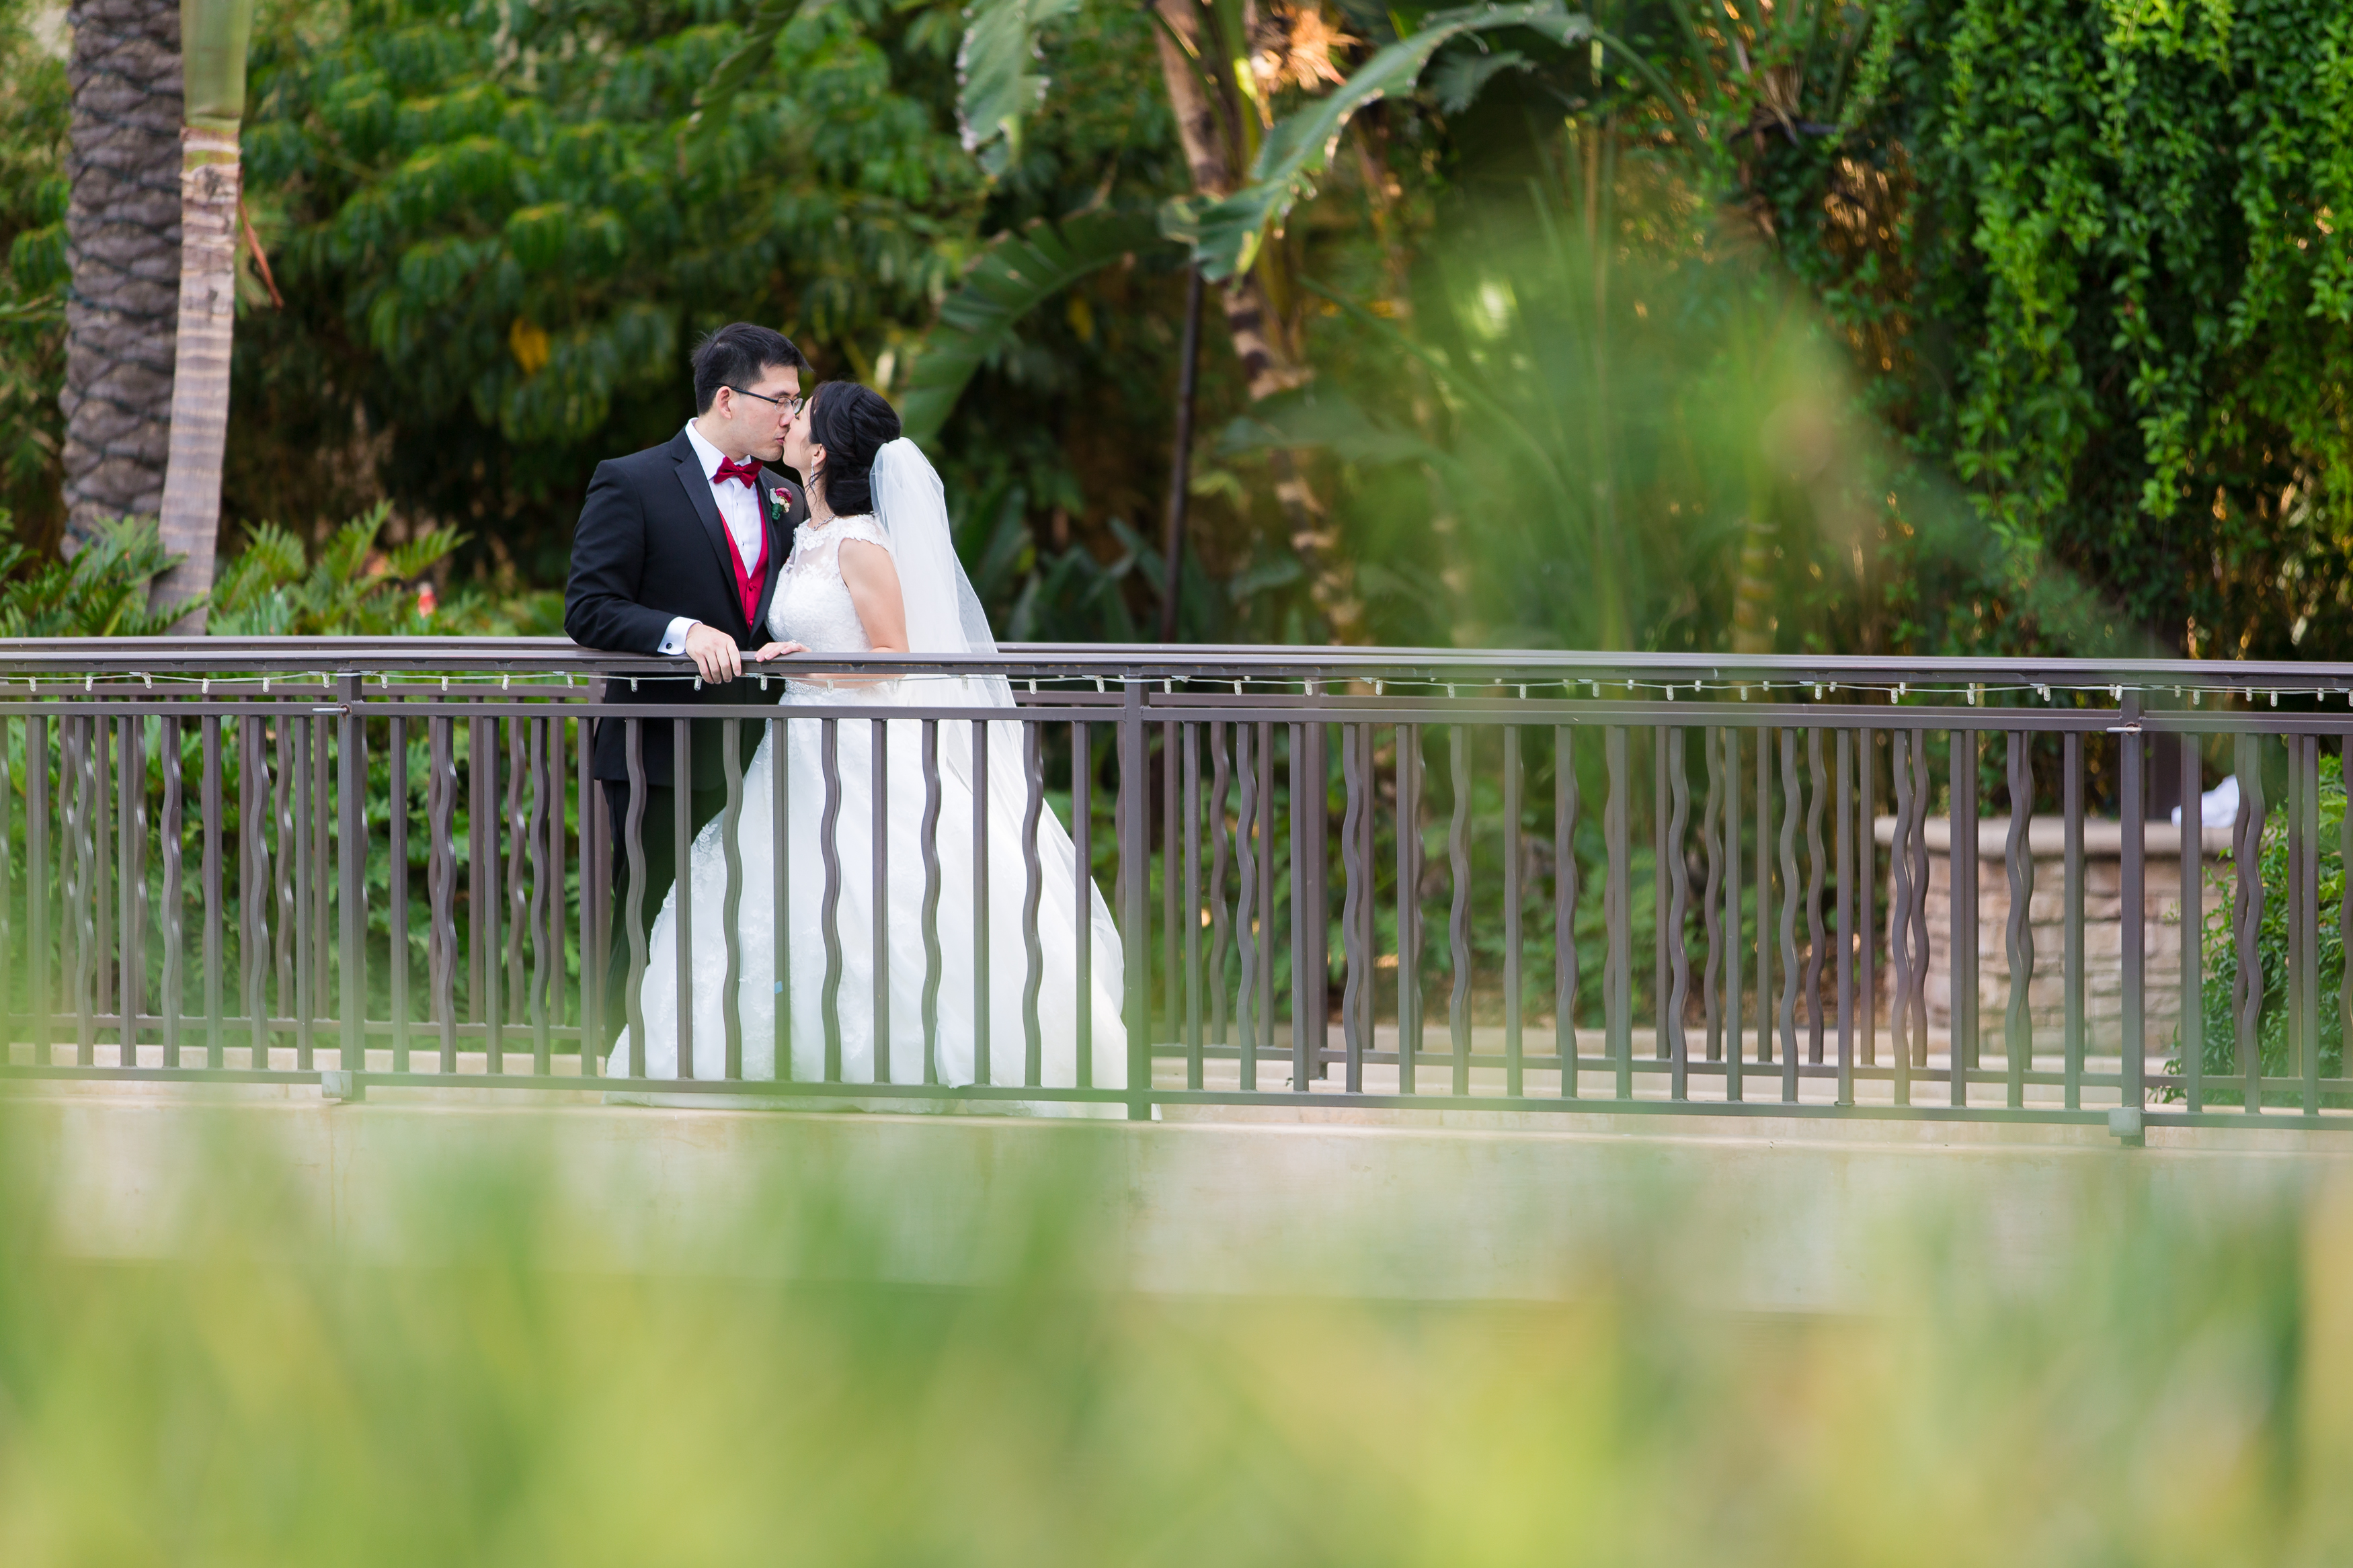 Wedding couple kissing on bridge surrounded by grass and palm trees